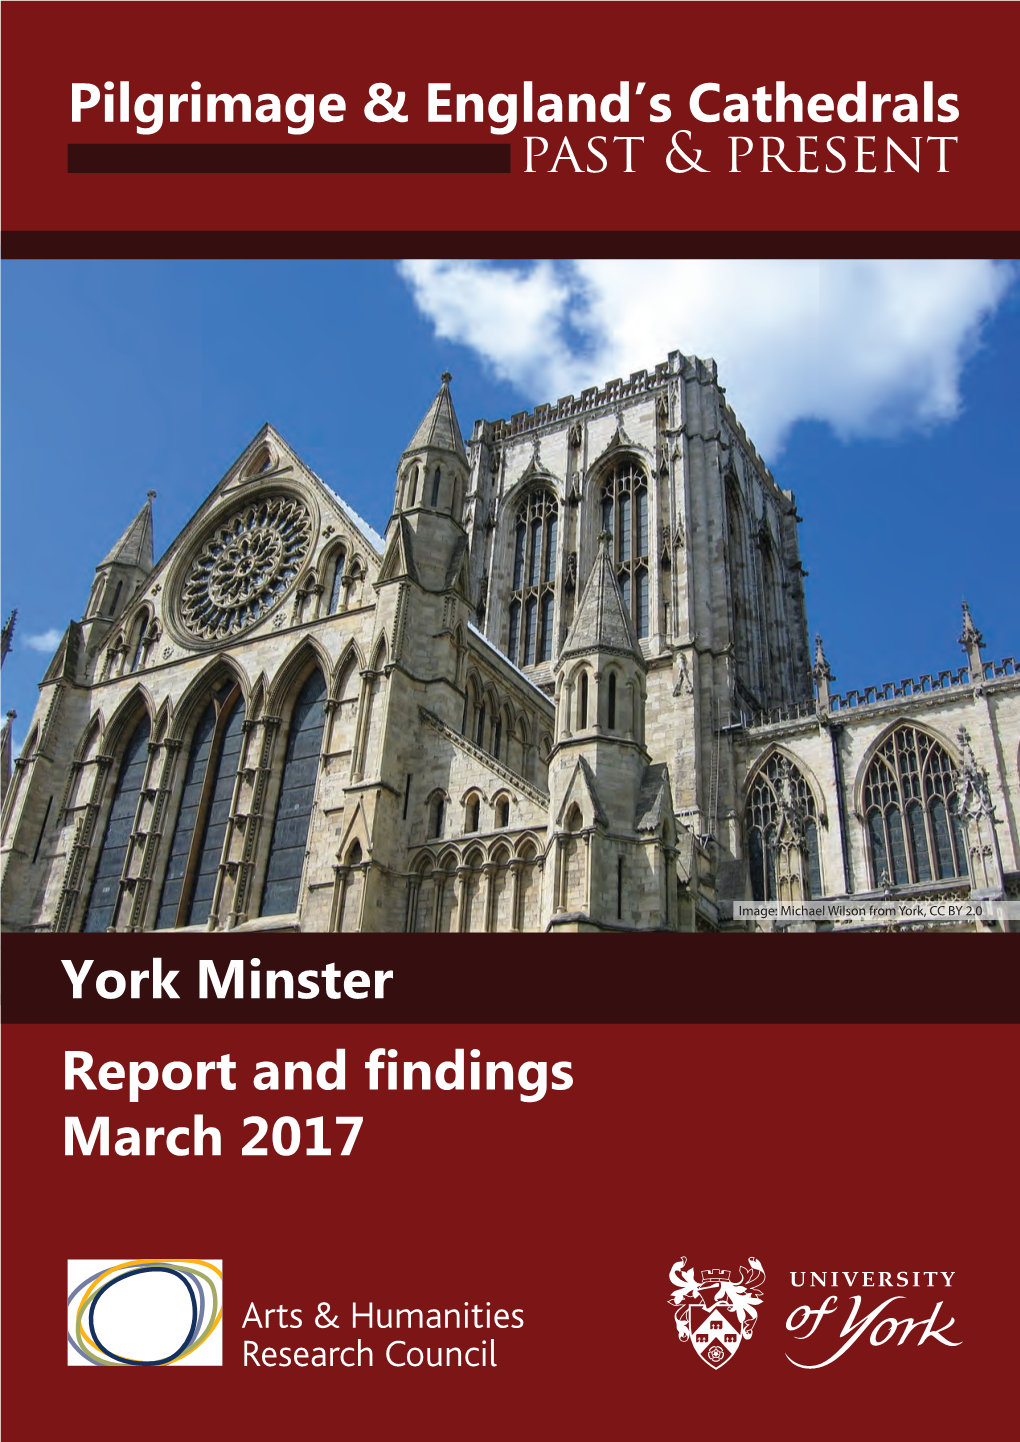 York Minster Report and Findings March 2017 Pilgrimage & England's Cathedrals Past & Present